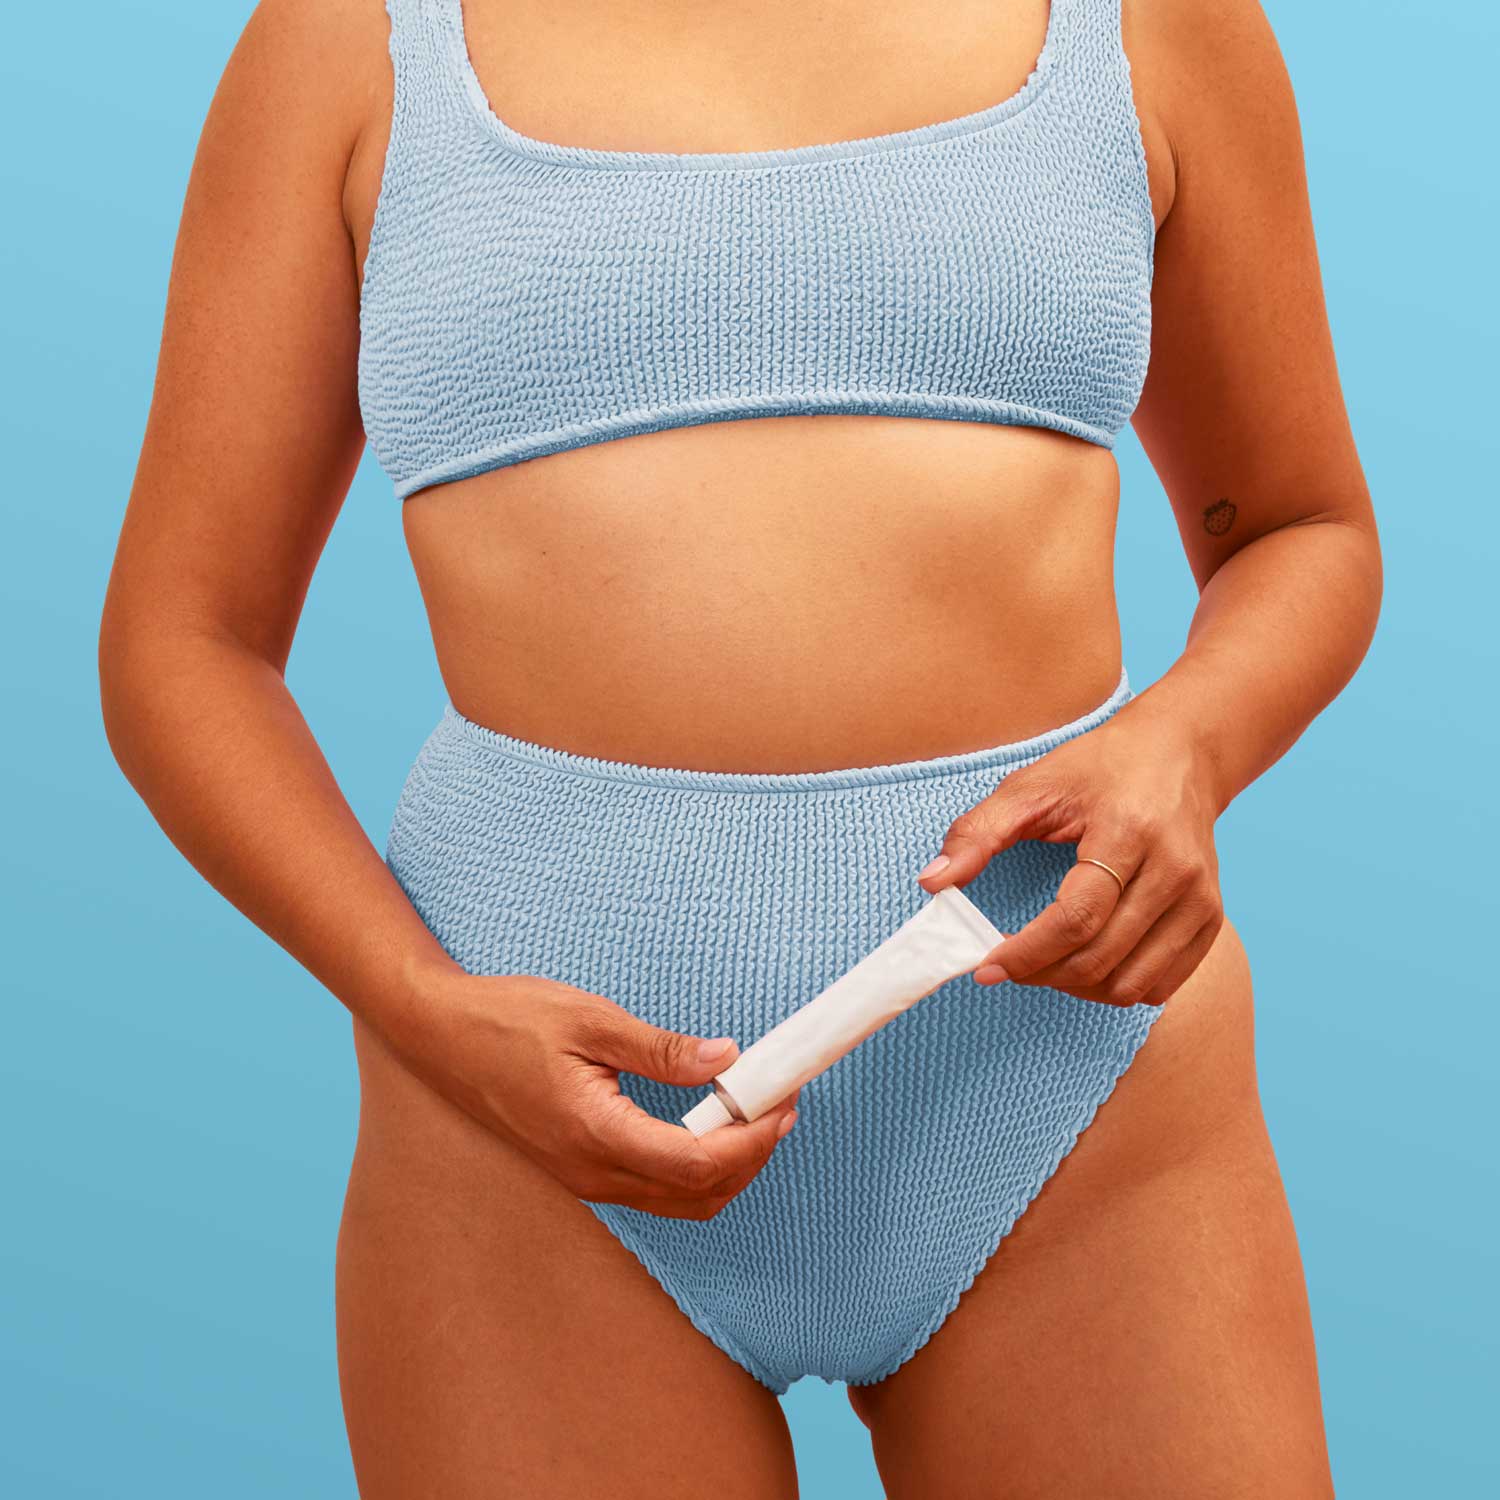 Model holding a tube of Wisp Estradiol Vaginal Cream with a blue background